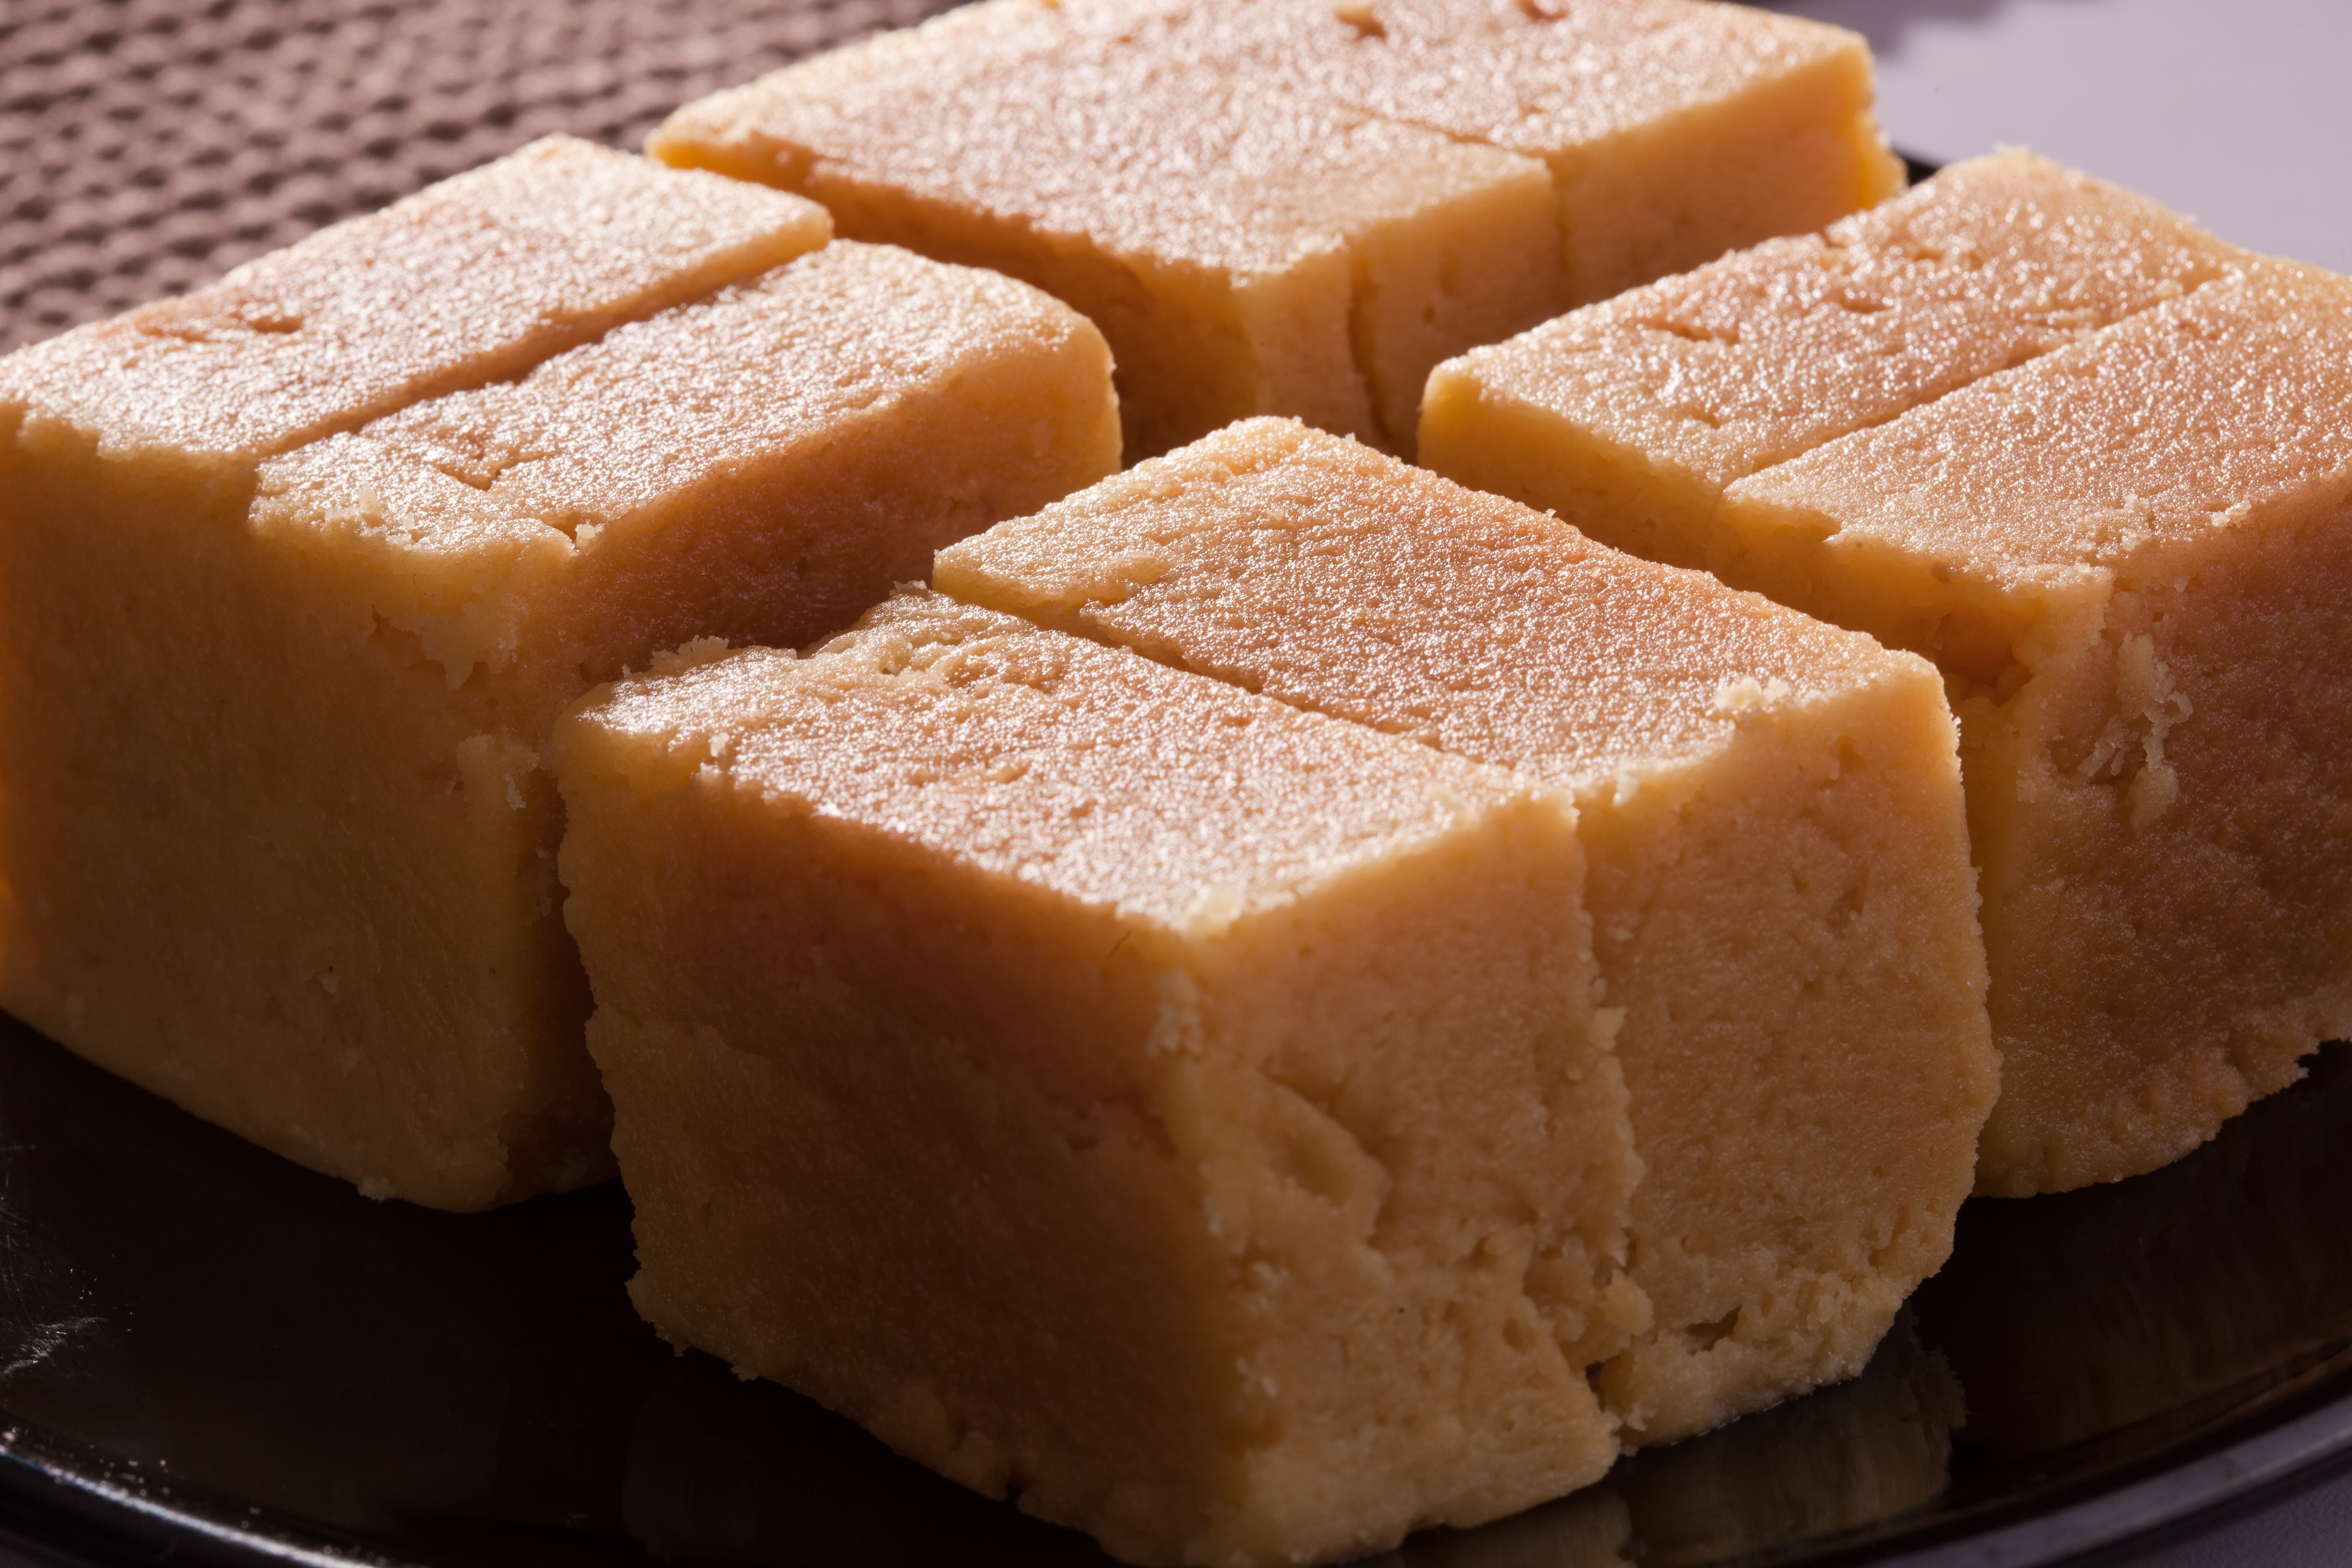 Nutritional value in sweets – Mysore Pak